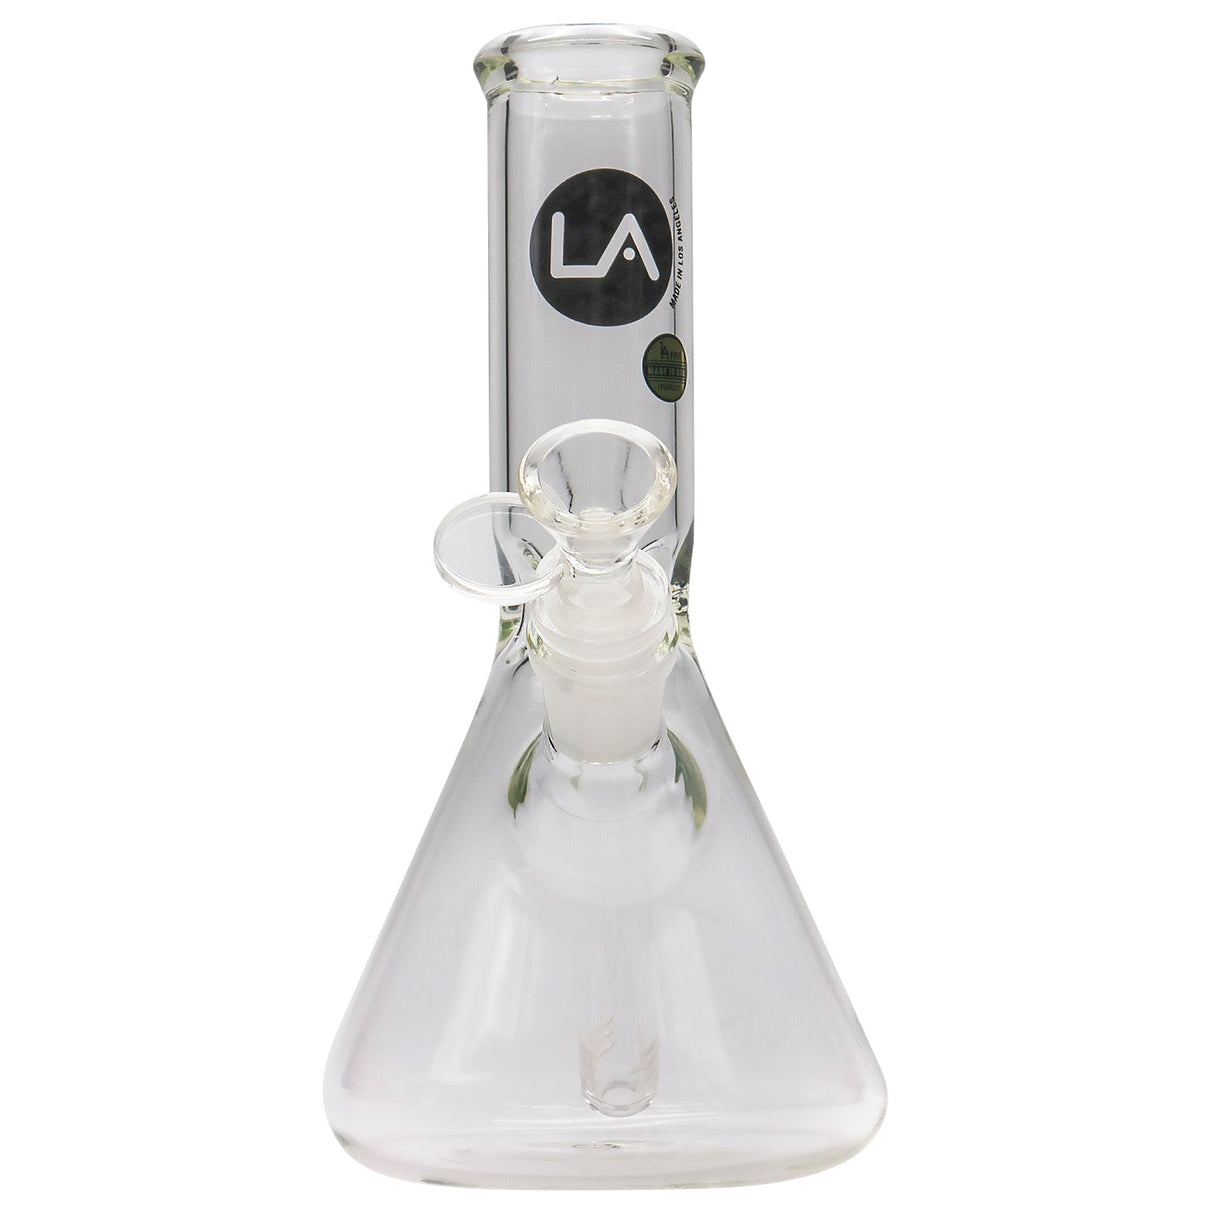 LA Pipes Basic Beaker Water Pipe, clear borosilicate glass, front view on white background